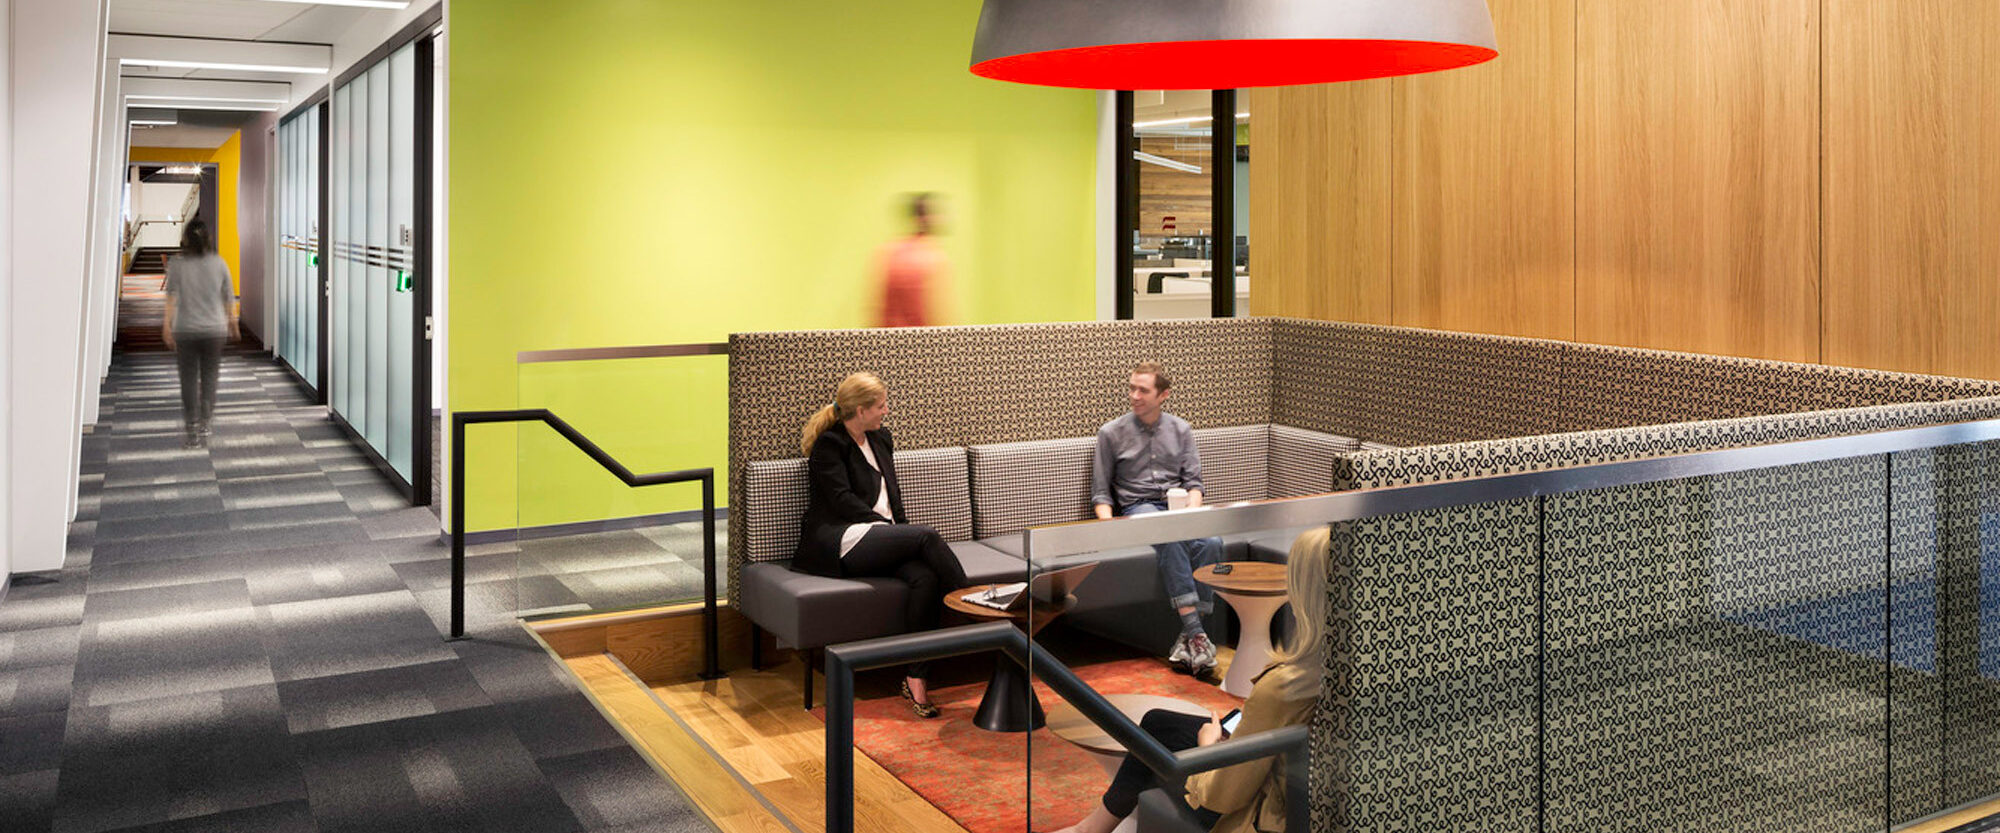 Modern office breakout space with geometric patterned booth seating, a large black and red pendant light, vibrant green walls, and wood paneling, designed for casual collaboration, bordered by a carpeted hallway leading to private work areas.